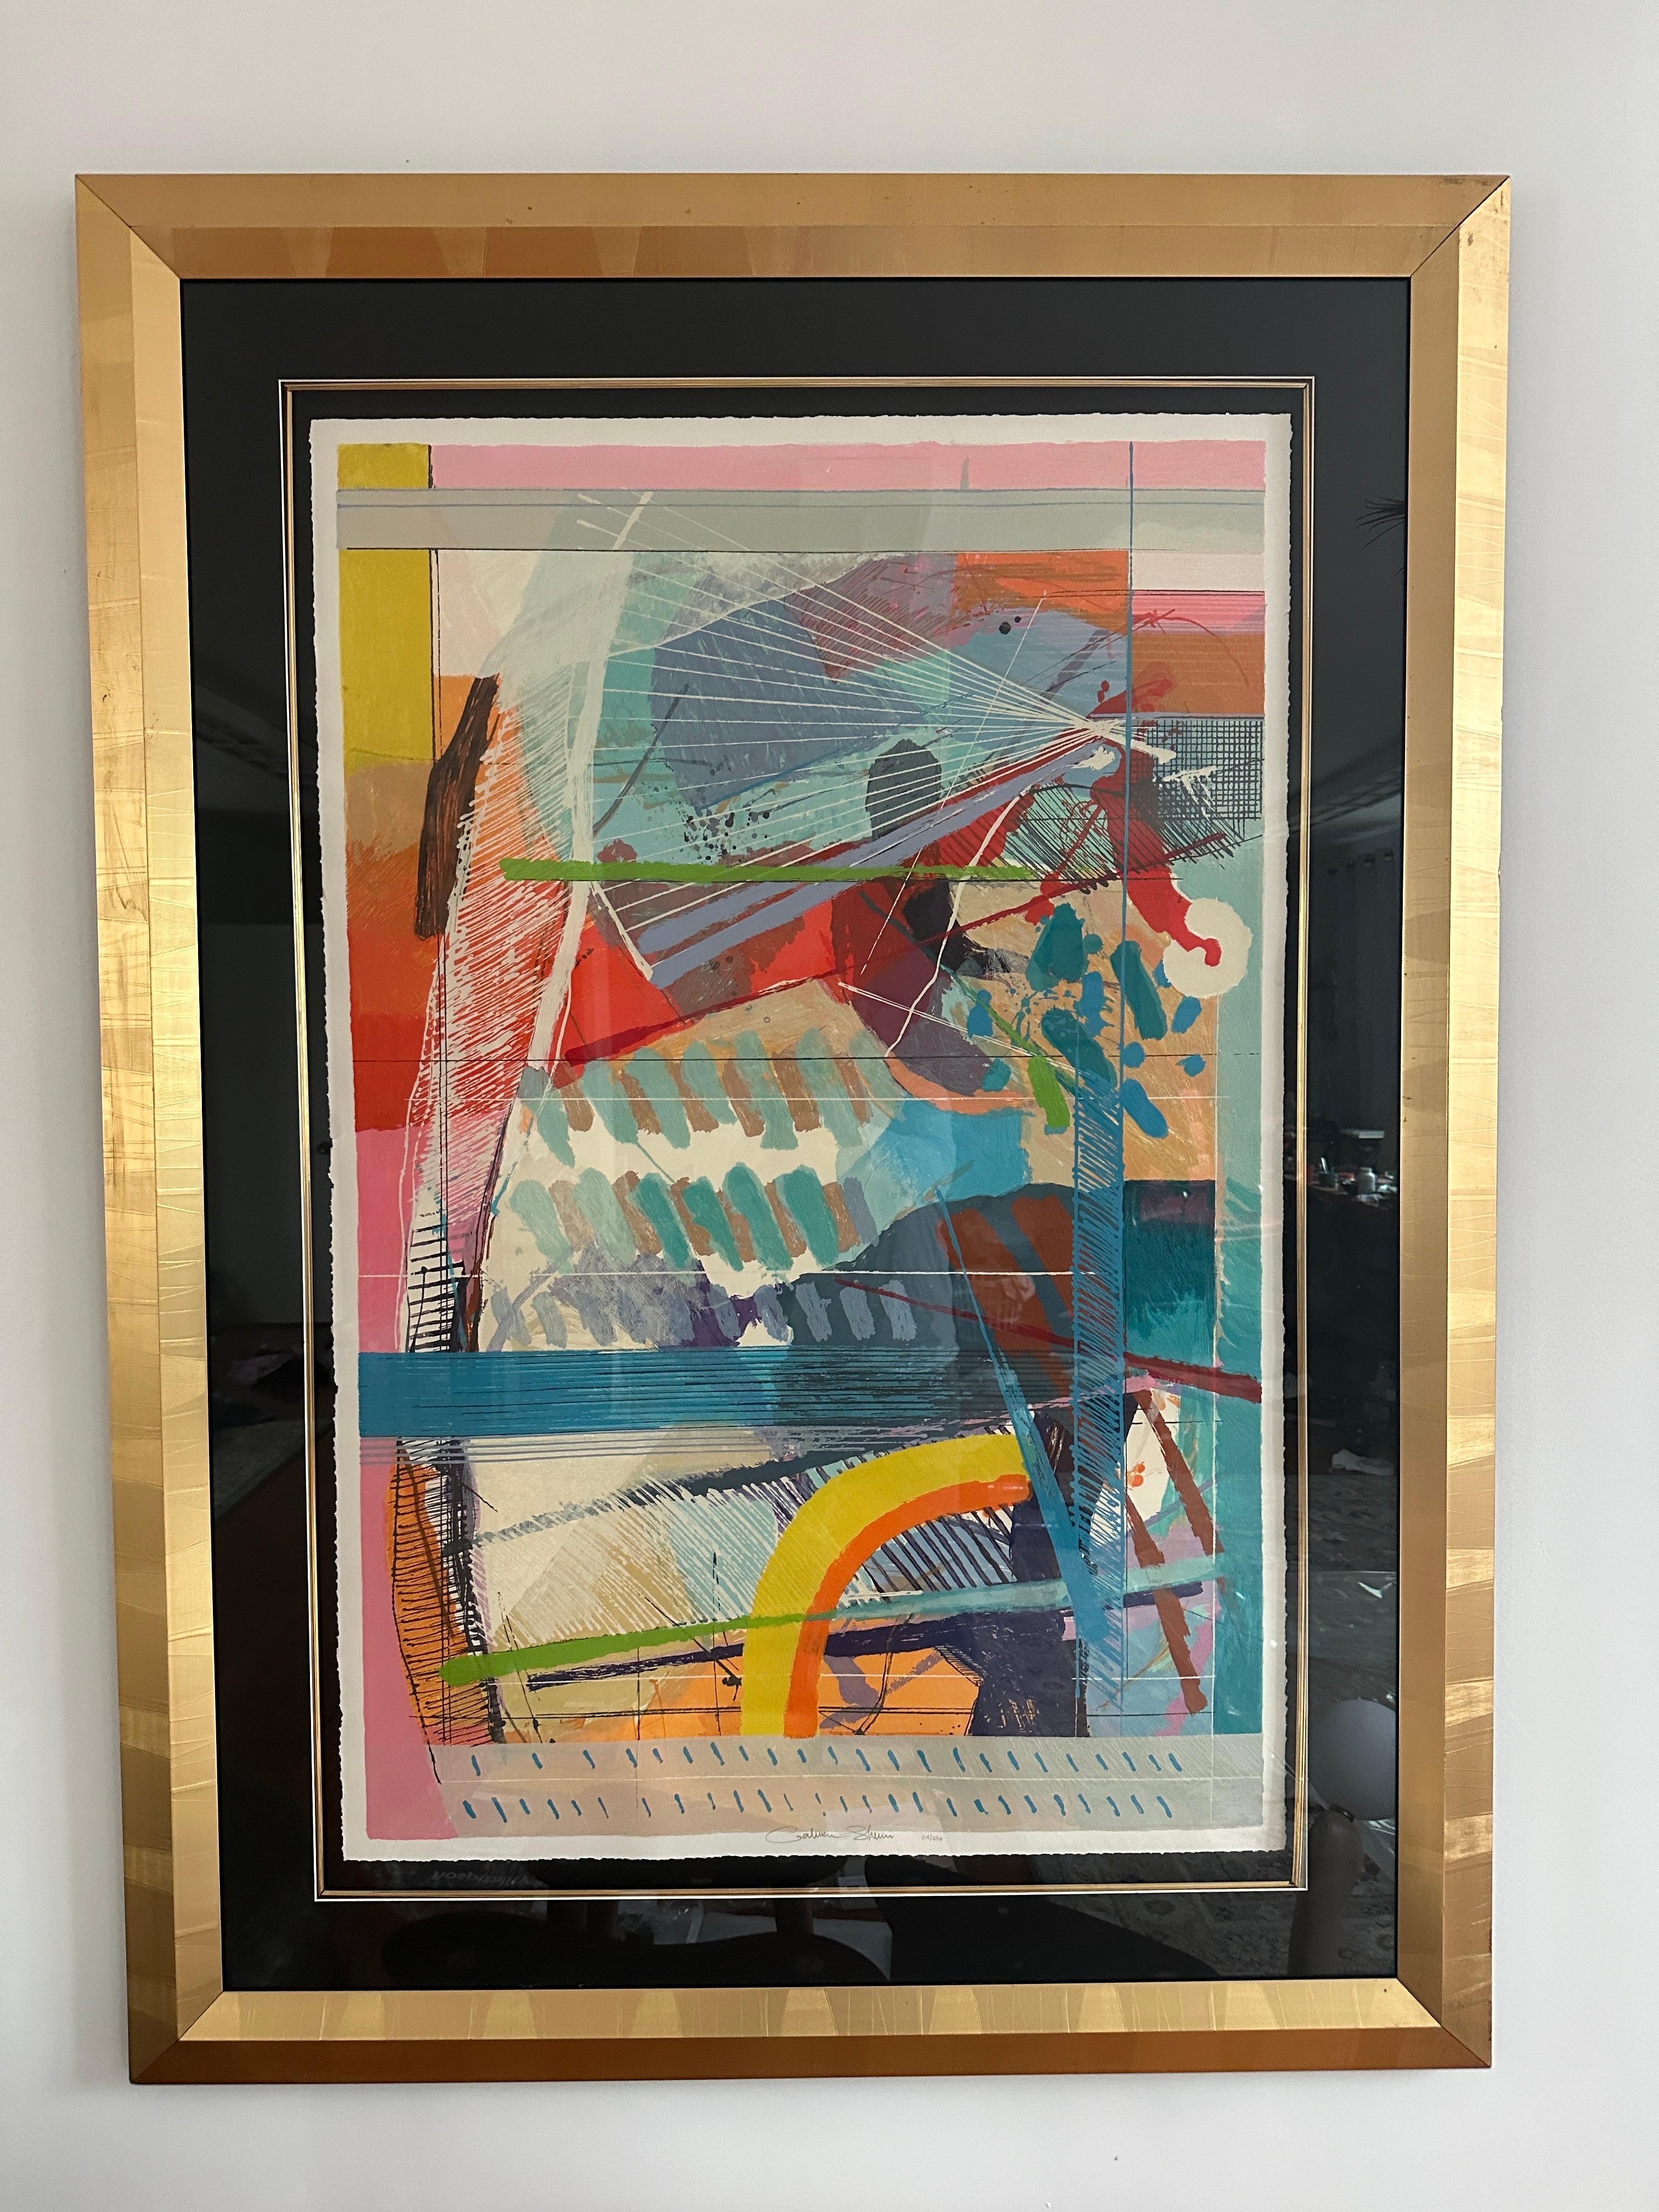 This is a beautiful screenprint in colors by Calman Shemi. This work is in very good overall condition with vibrant colors. This is a limited edition and is signed and numbered along lower edge 'Calman Shemi 64/220'.
This work is framed is a gilt